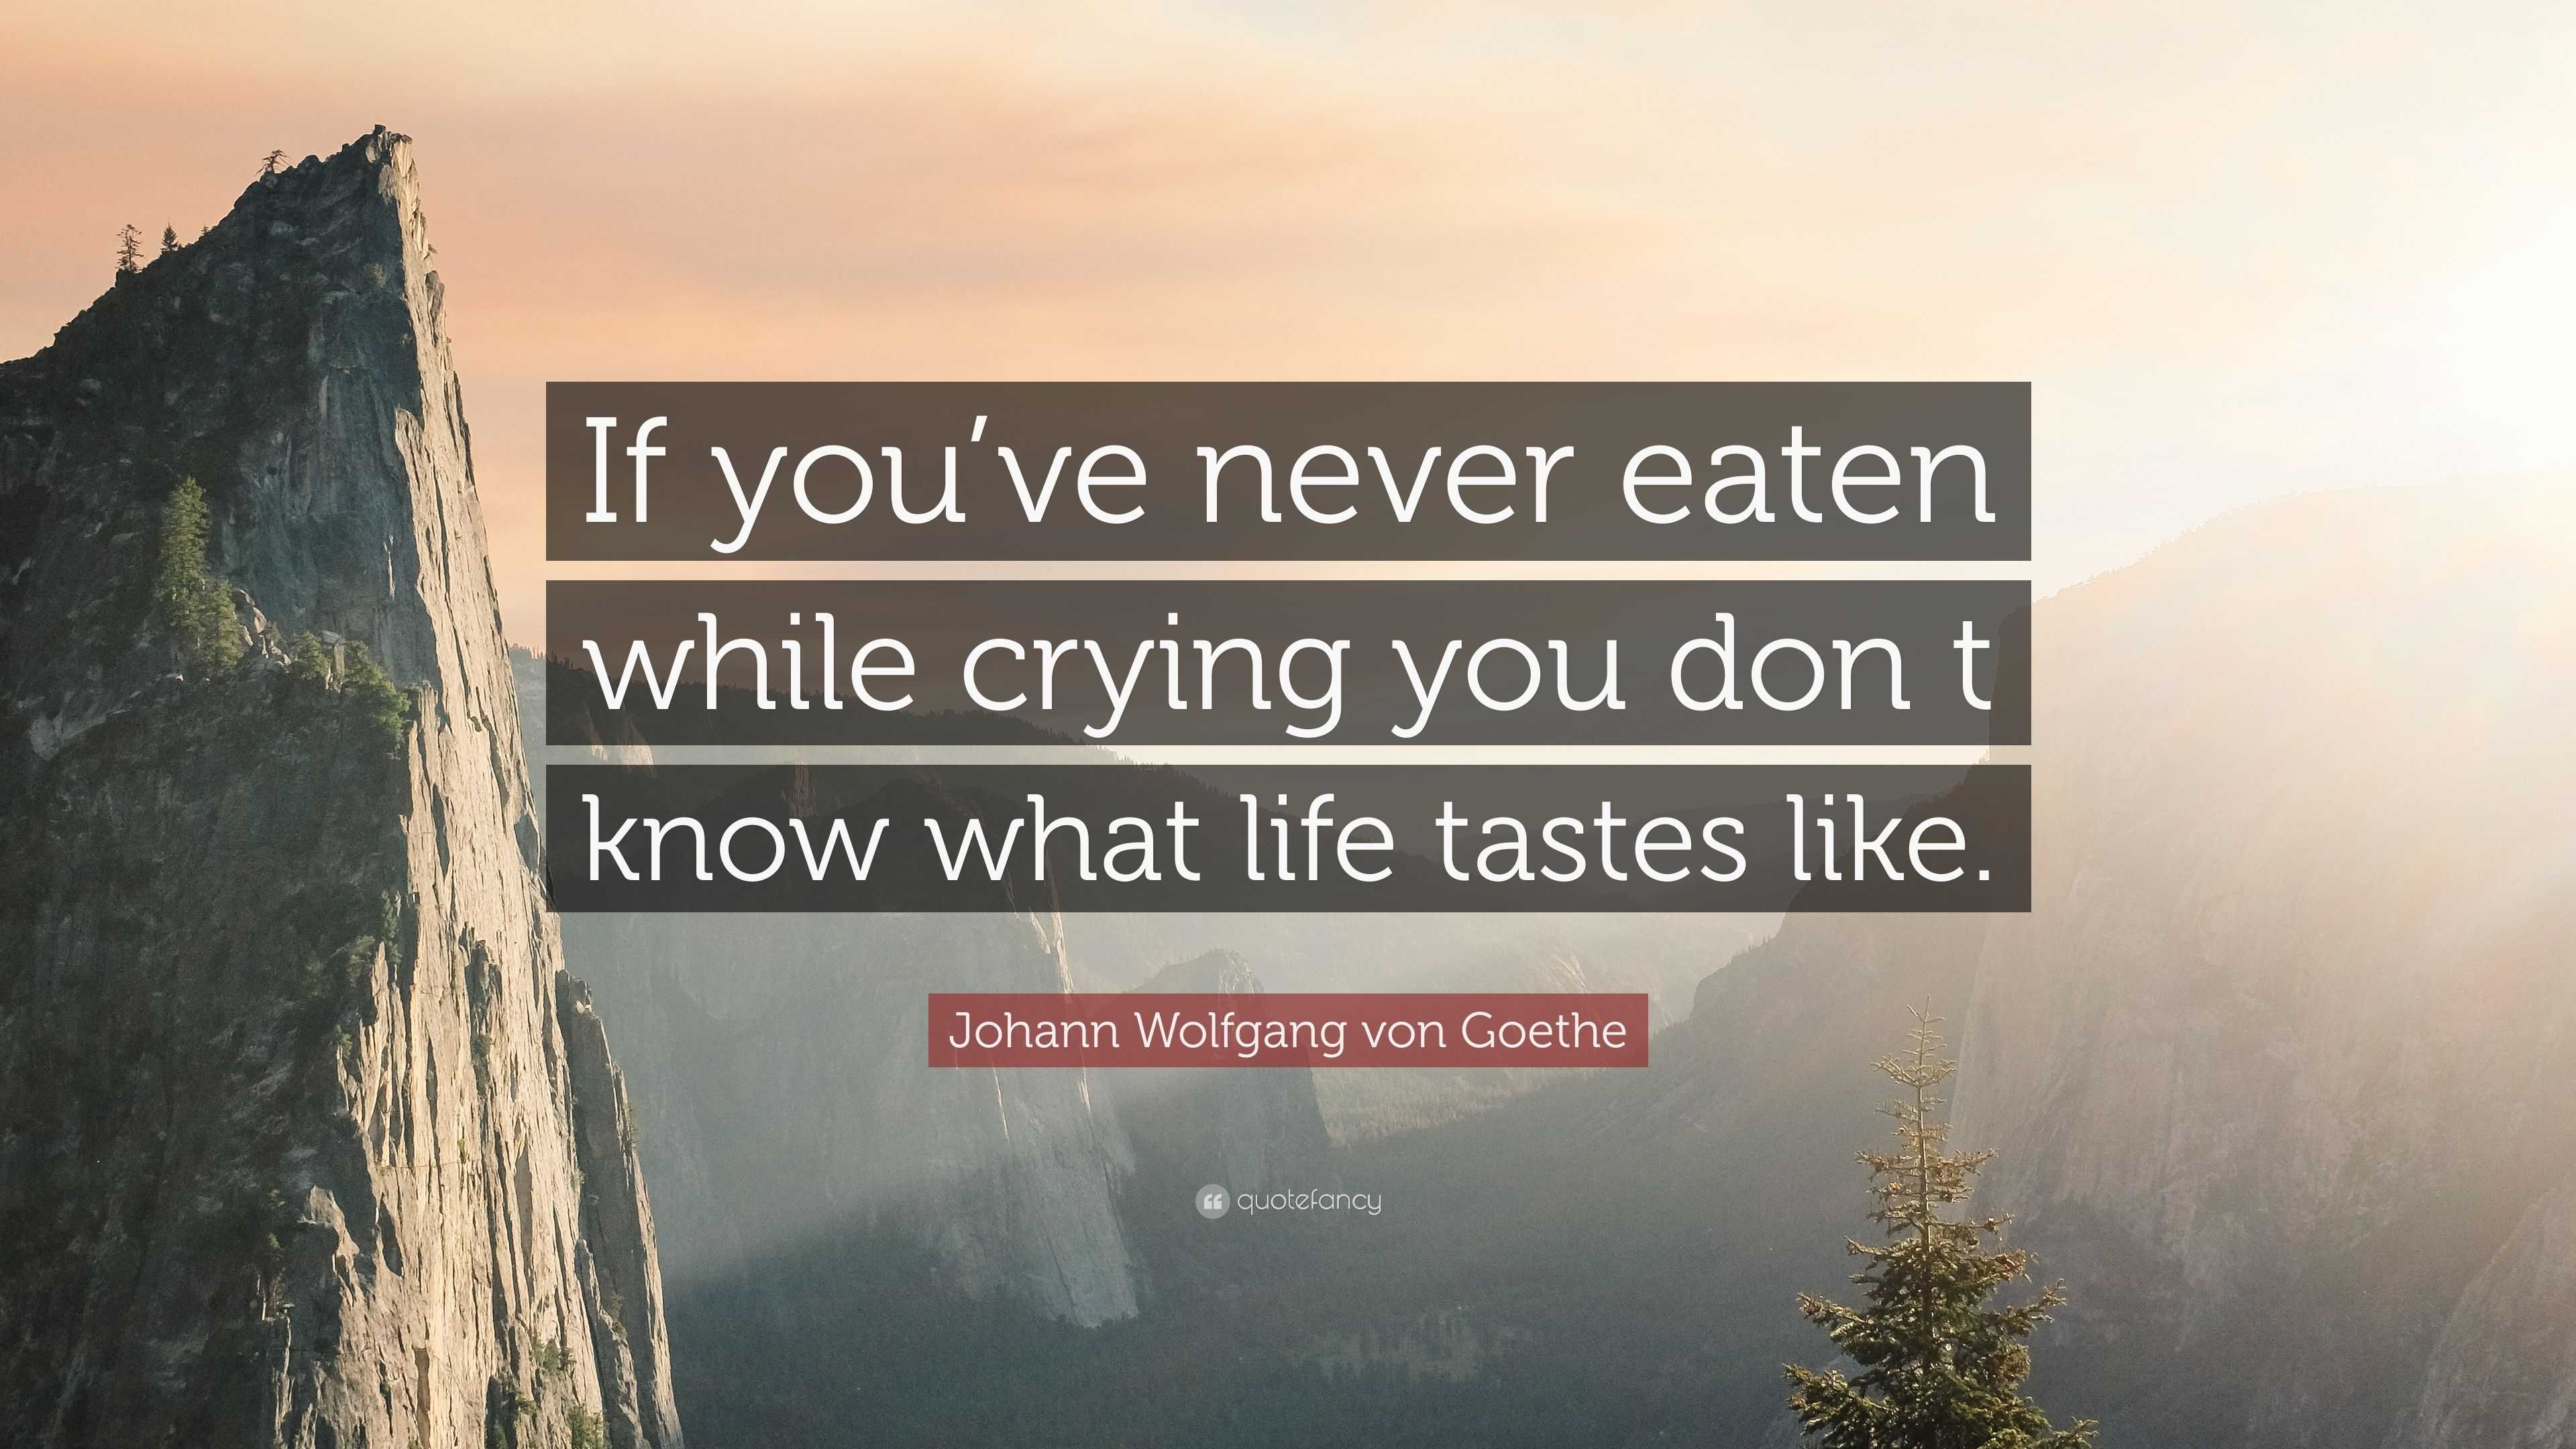 Johann Wolfgang von Goethe Quote: “If you’ve never eaten while crying ...